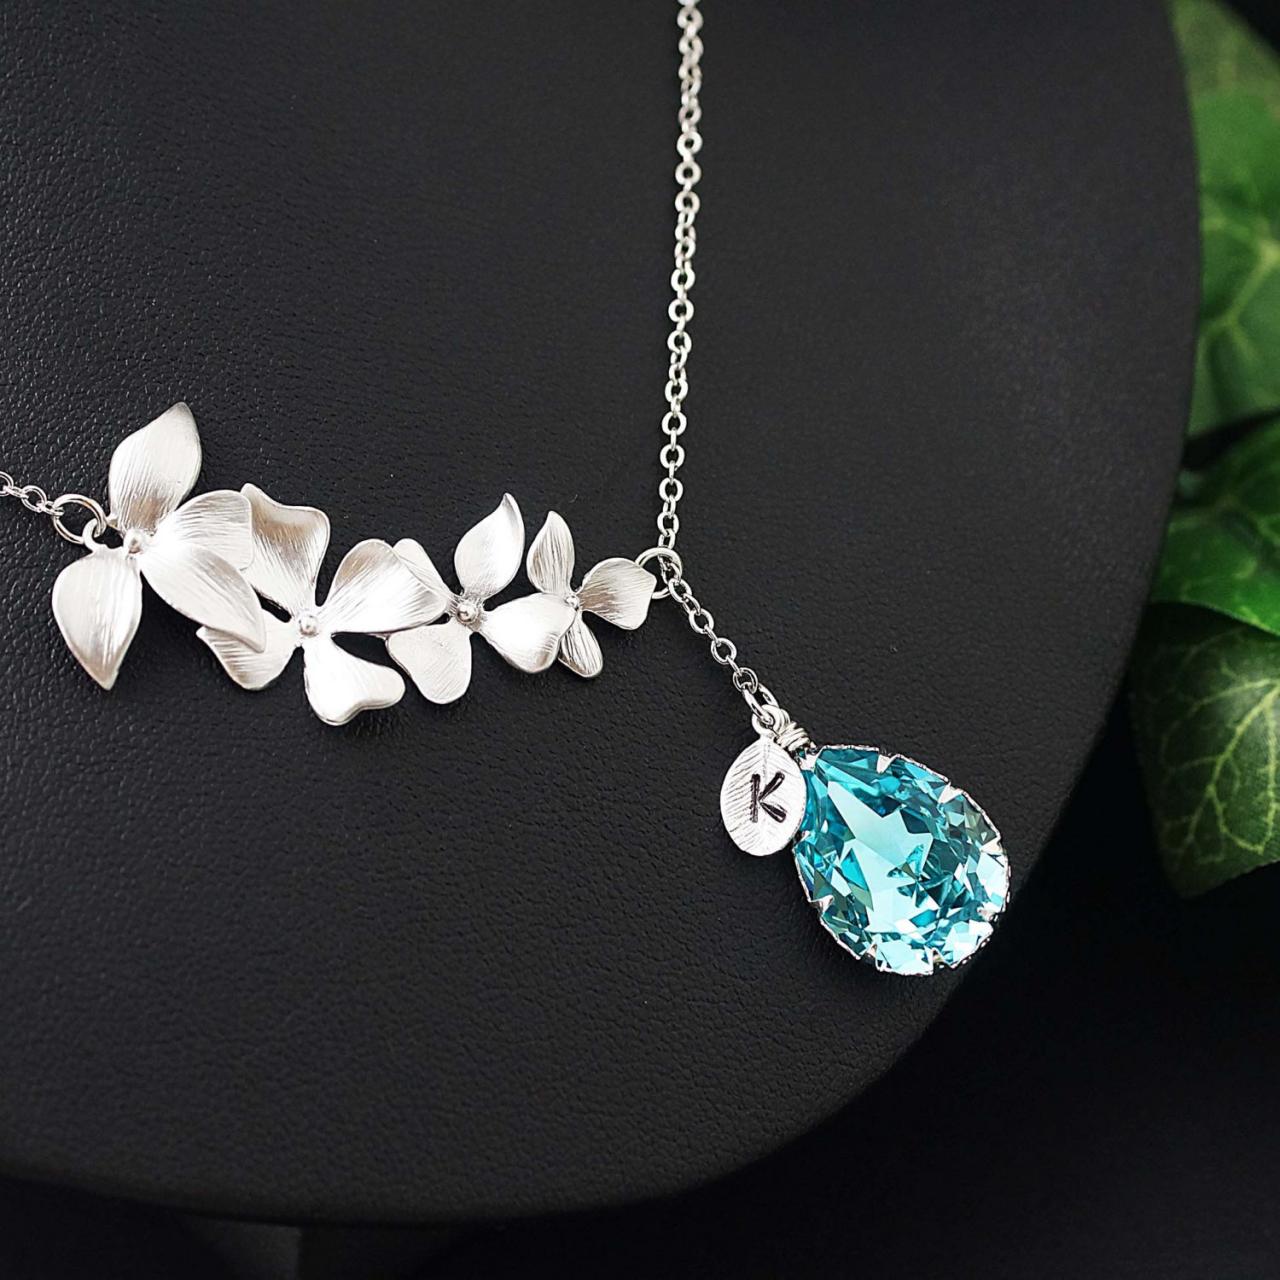 Personalized Necklace Bridesmaid Gift Four Flower Pendant With Swarovski Tear Drop And Initial Leaf Charm Necklace , For Her. Gift For Her